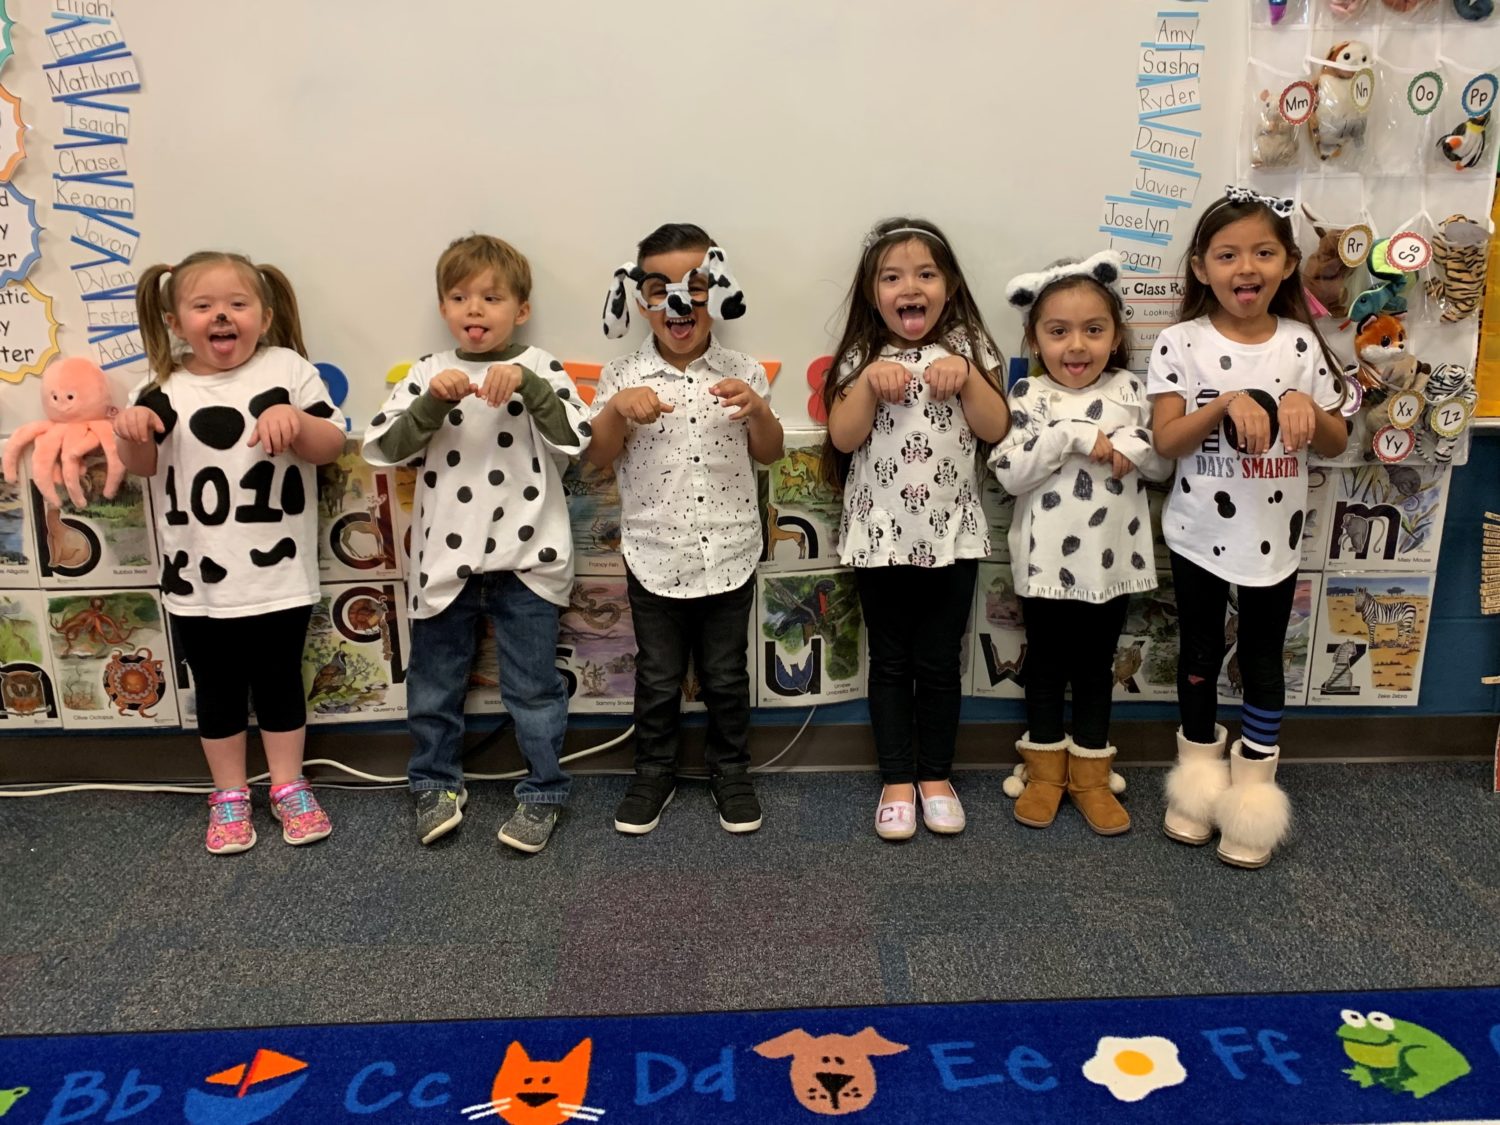 "six children dress as dalmations to celebrate 101 days of school"